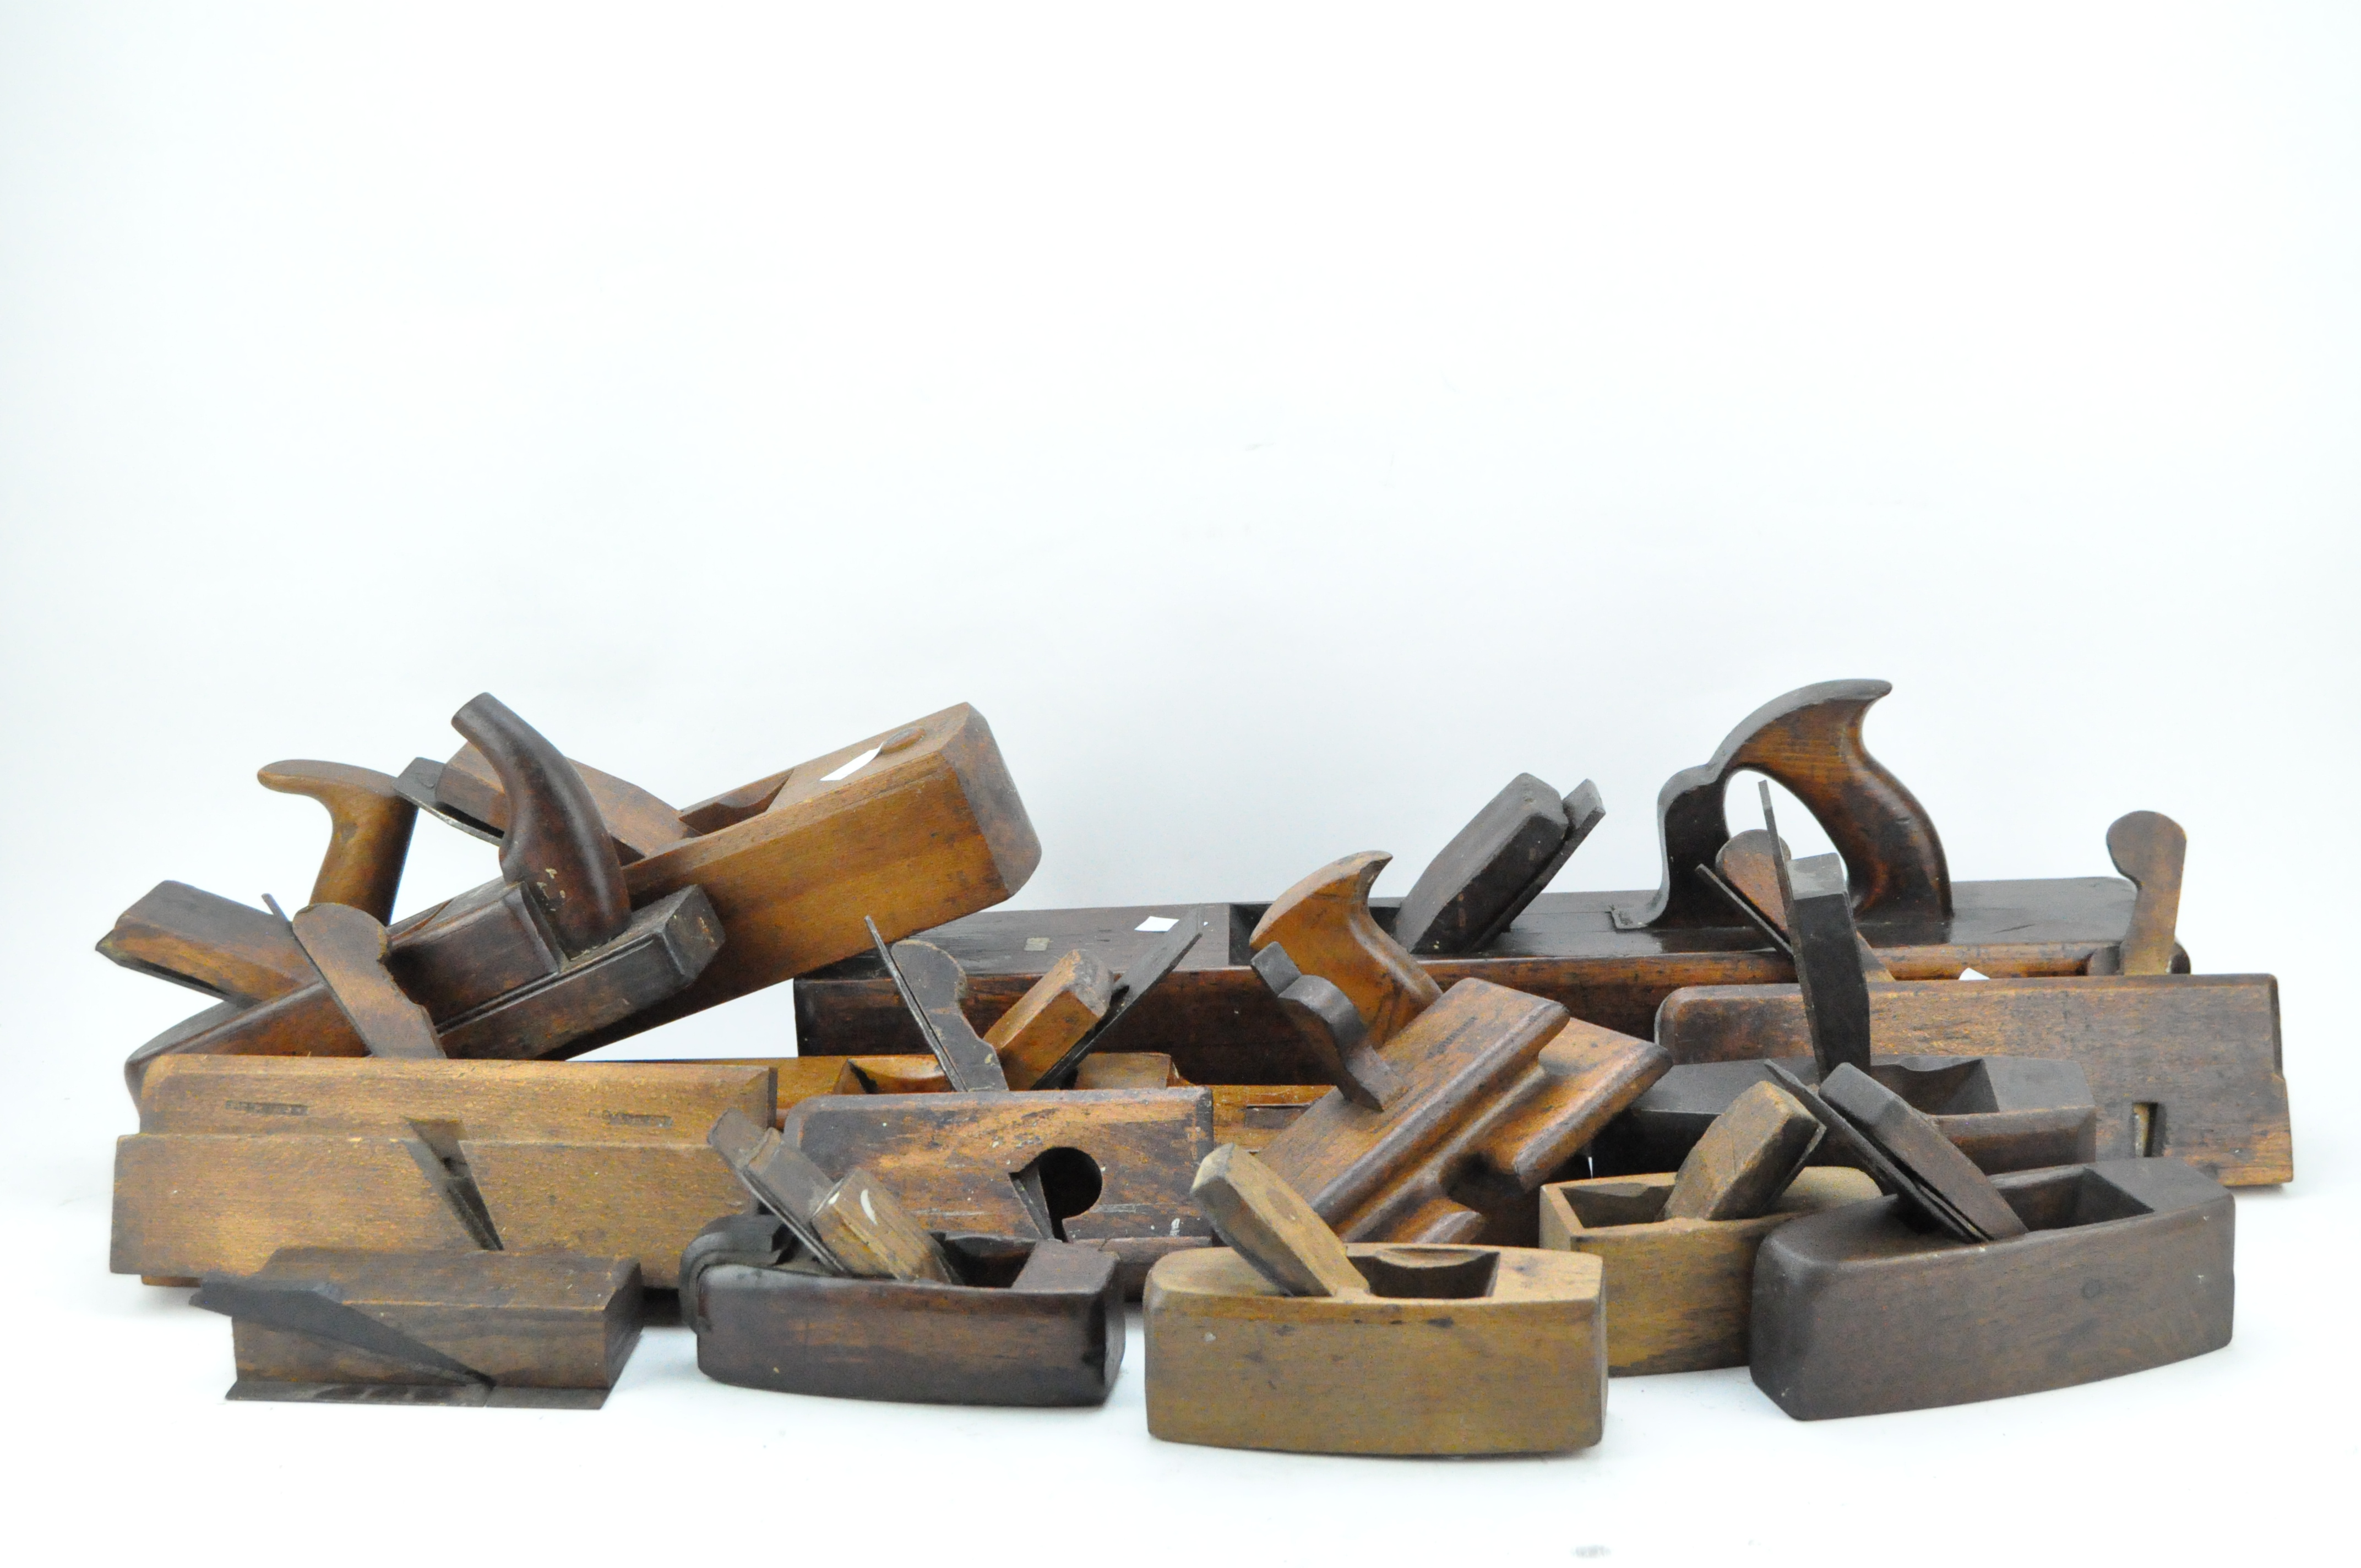 A collection of approximately 20 vintage wooden planes,